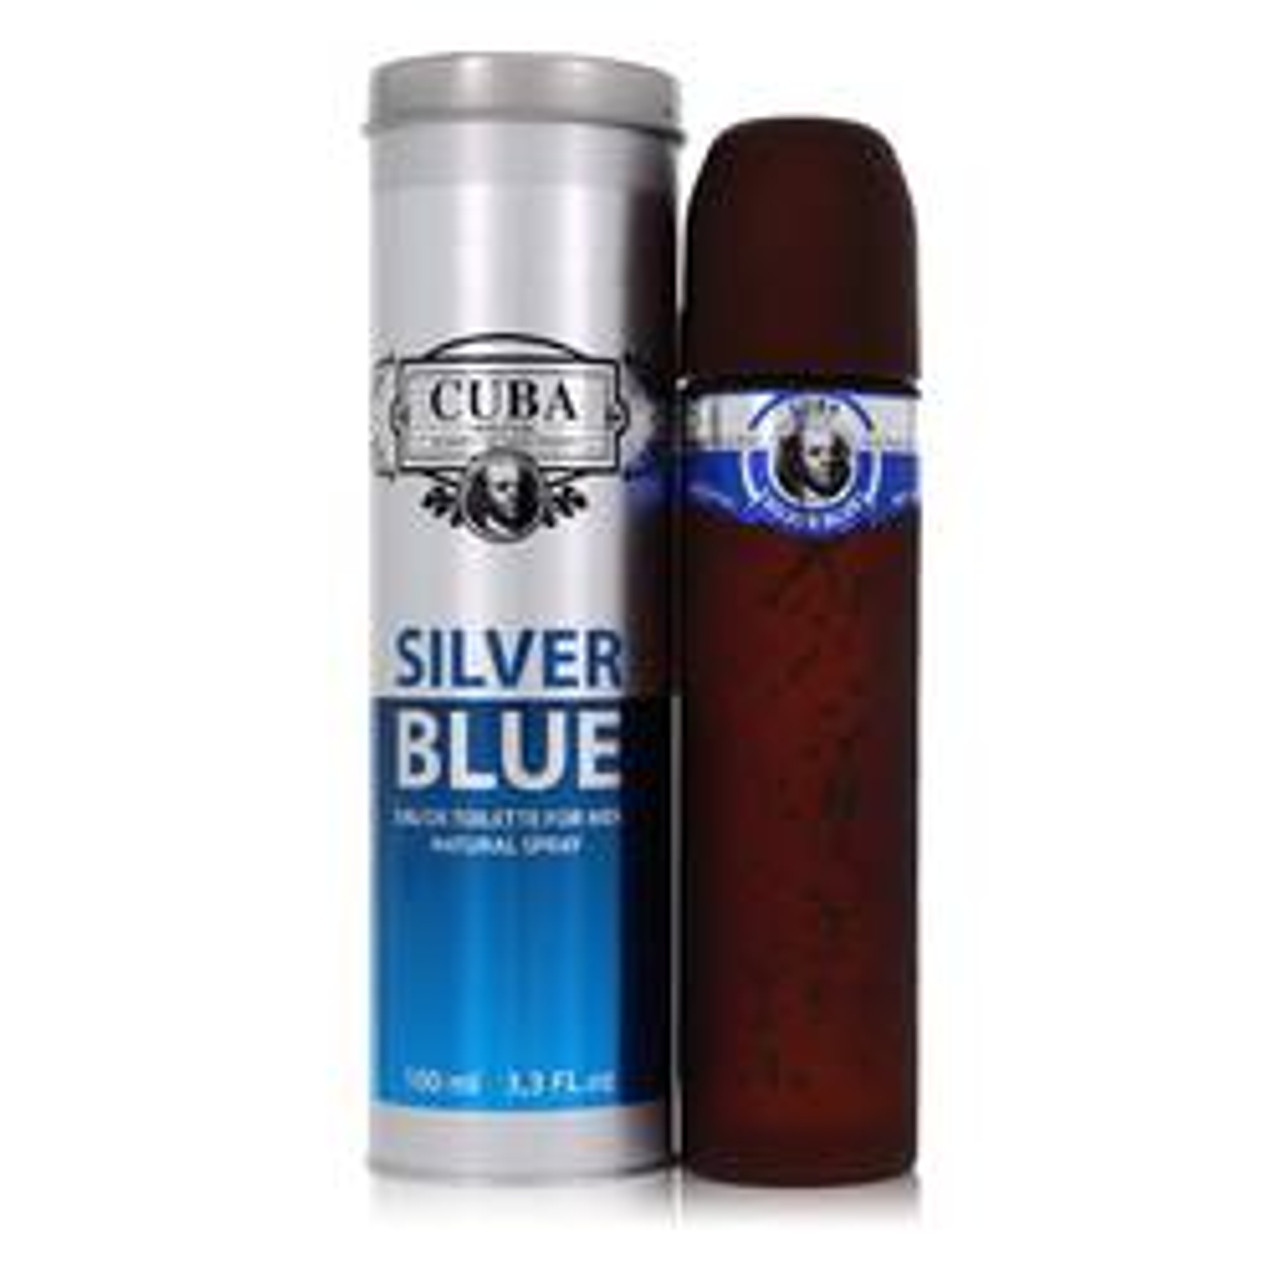 Cuba Silver Blue Cologne By Fragluxe Eau De Toilette Spray 3.3 oz for Men - [From 23.00 - Choose pk Qty ] - *Ships from Miami